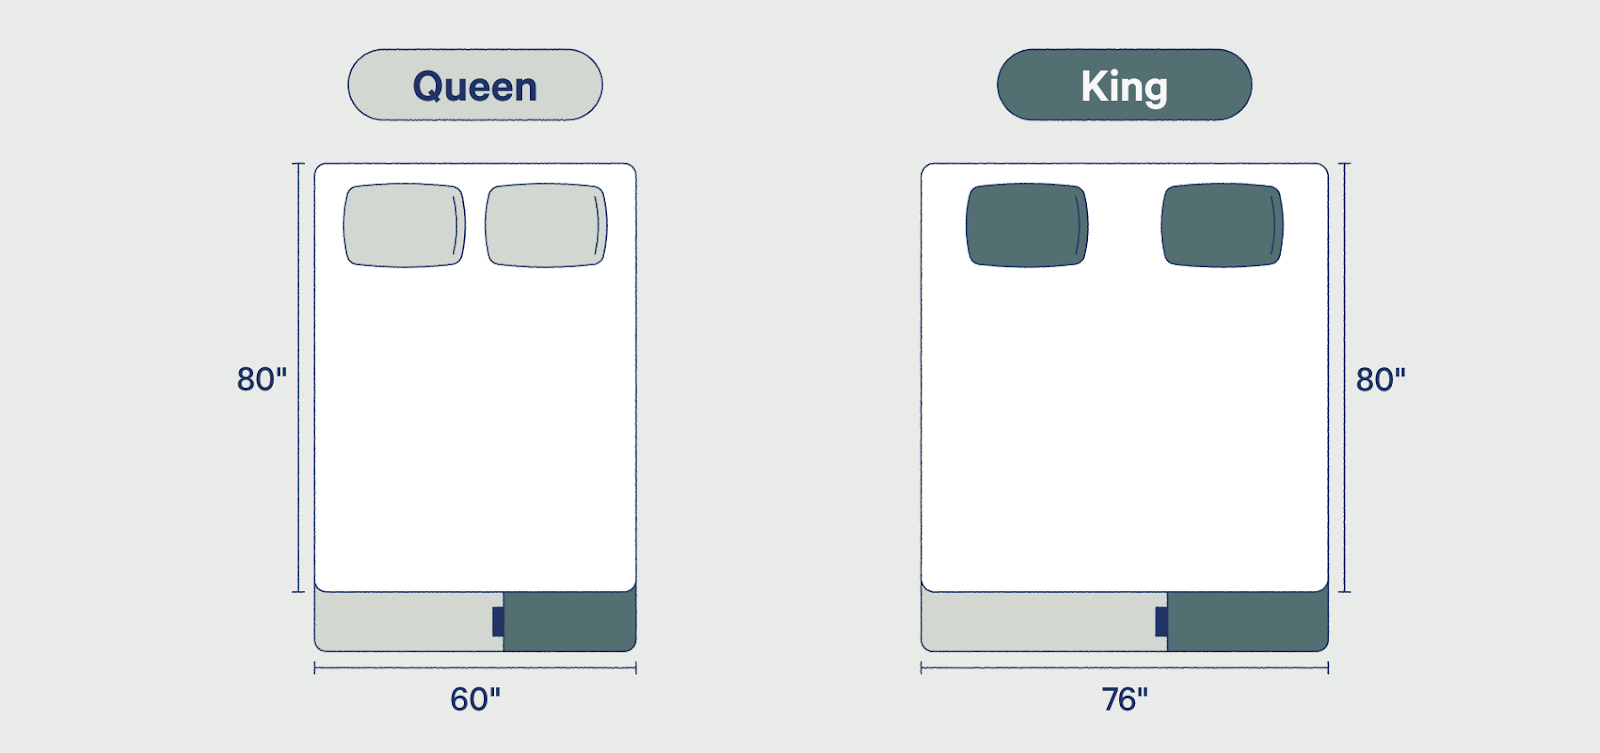 King Vs Queen Bed Size And Comparison, The Width Of A King Size Bed